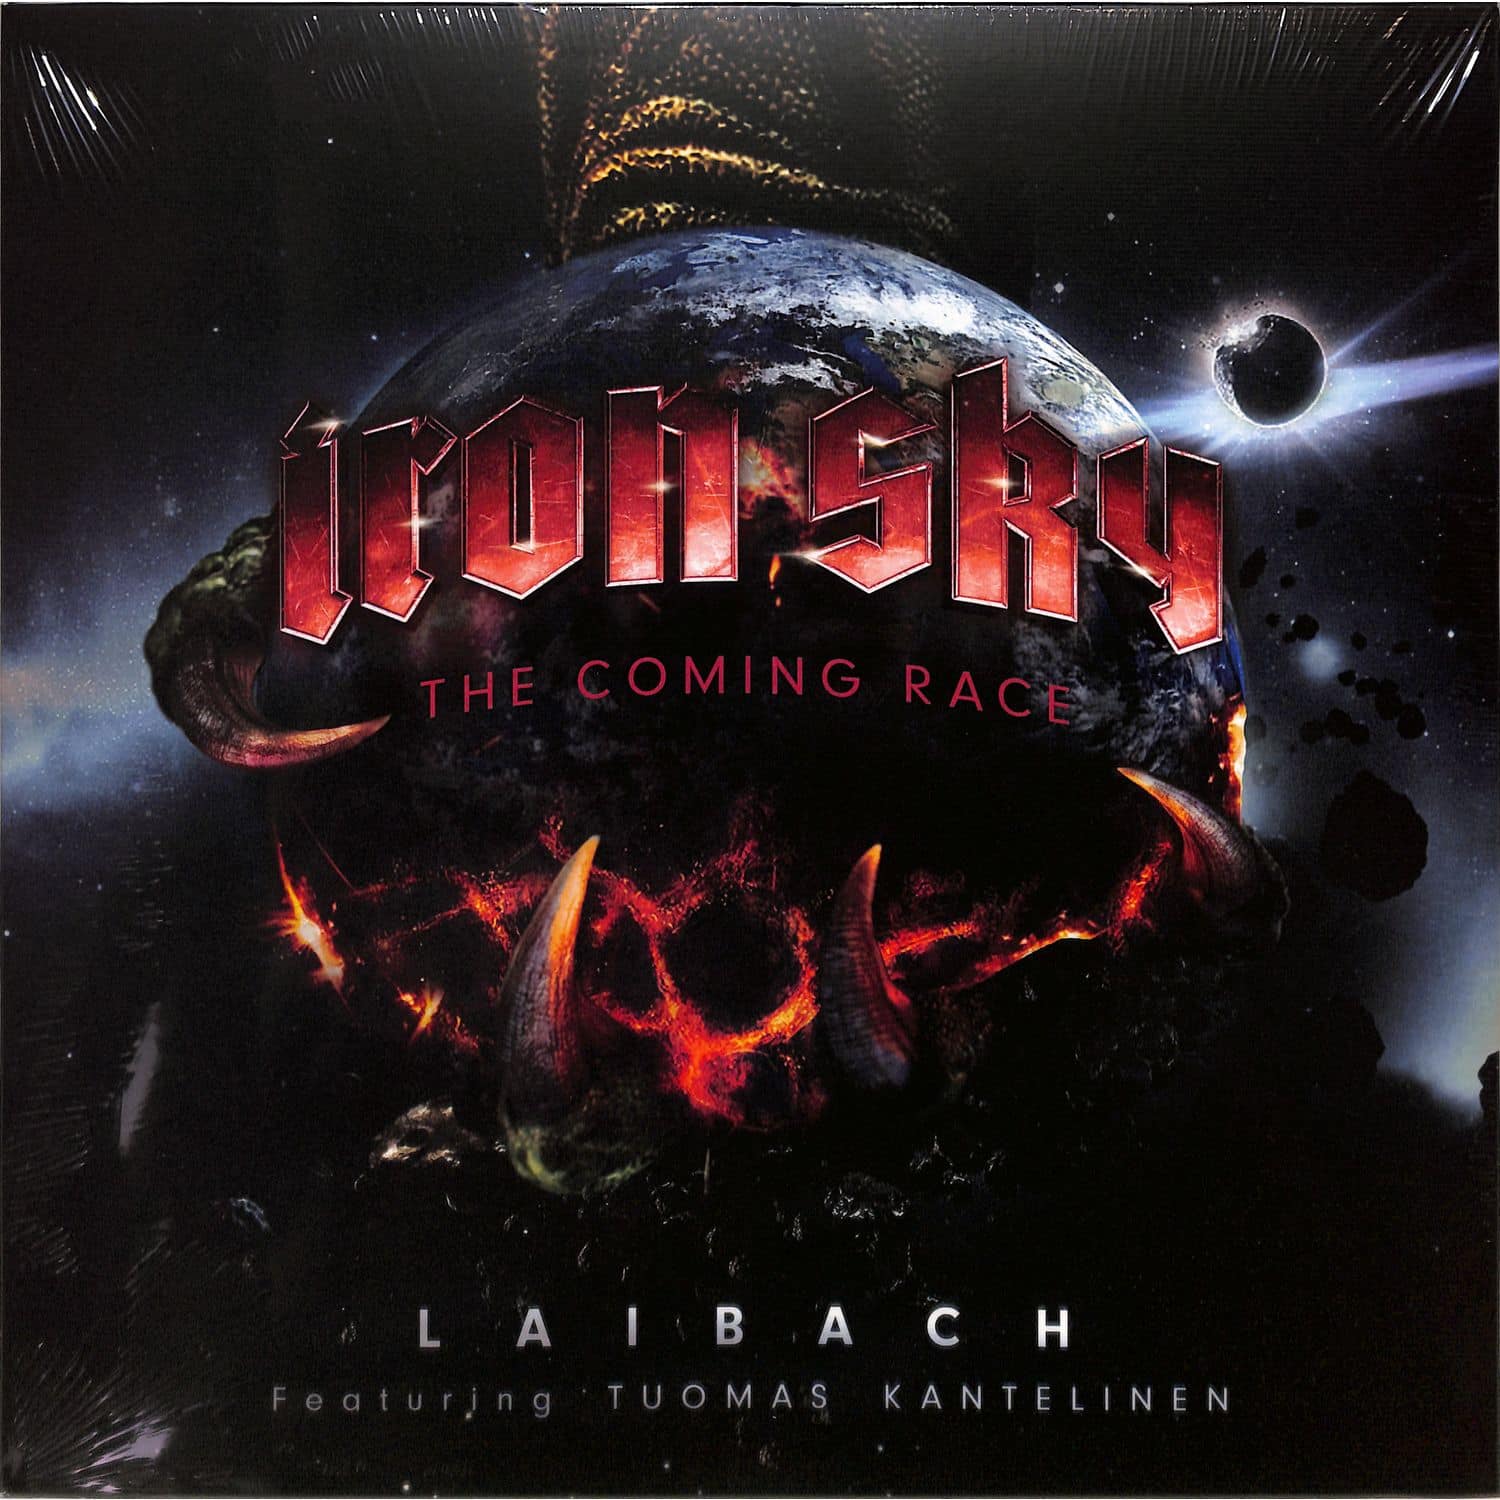 Laibach - IRON SKY: THE COMING RACE 